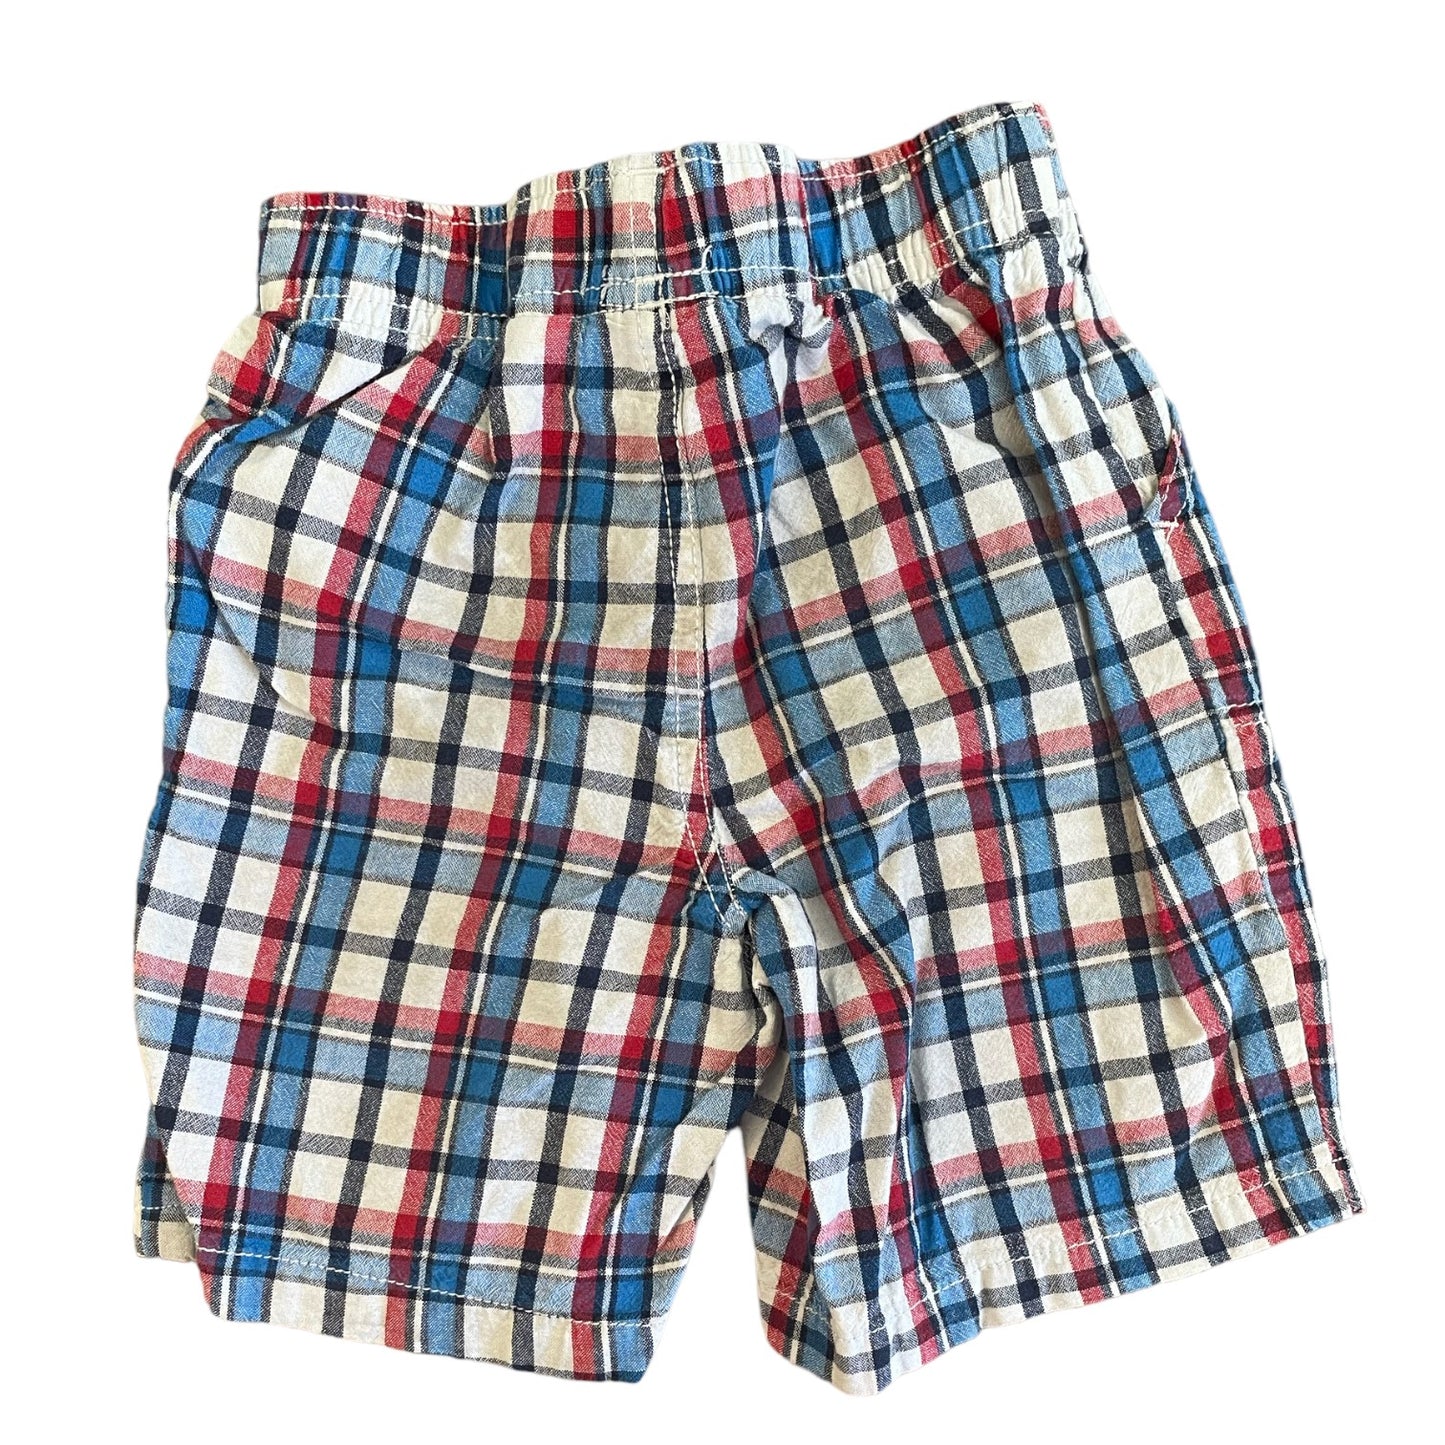 Jumping Beans Boys Shorts Size 4T